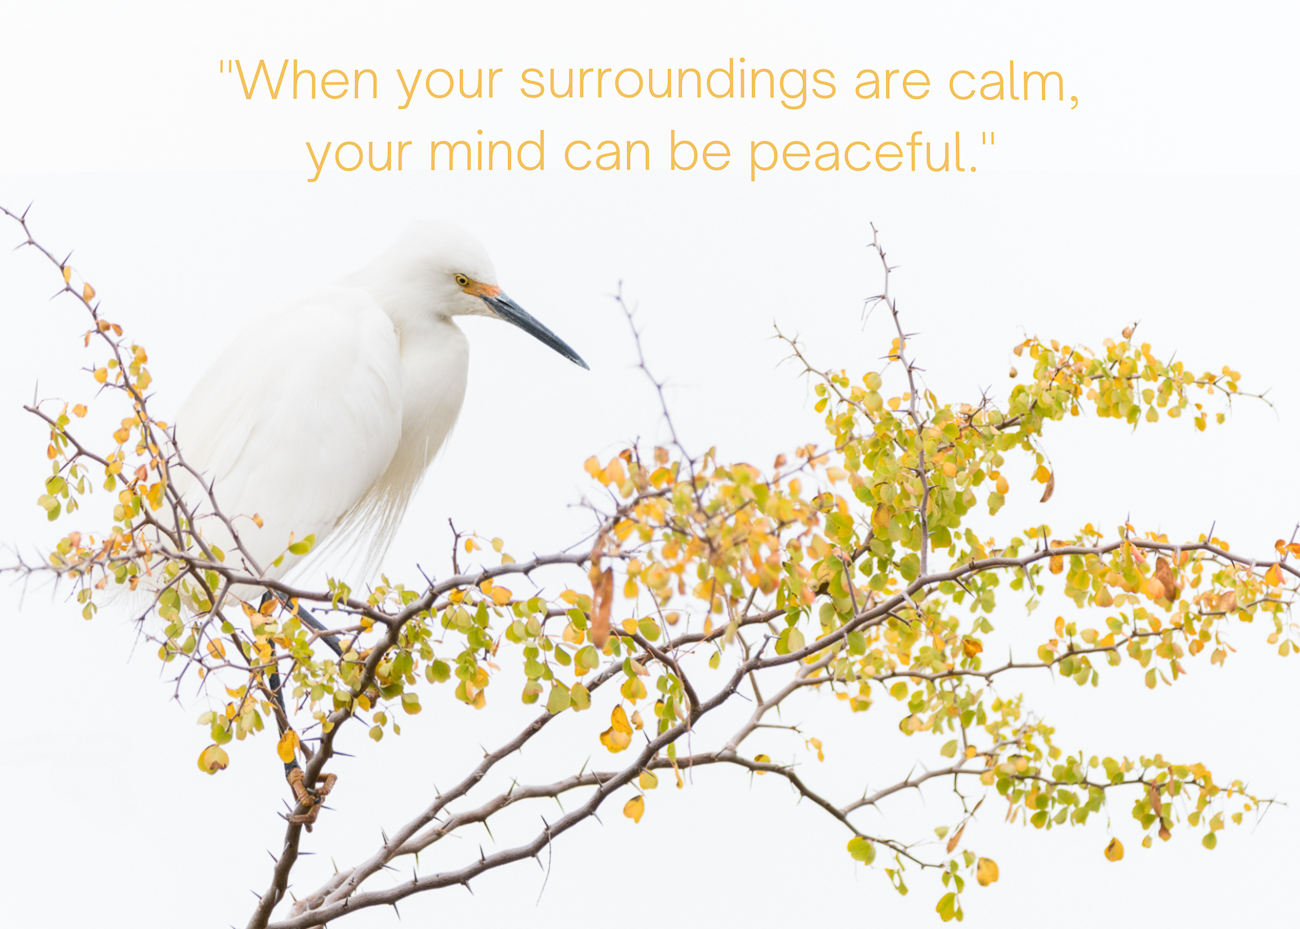 A photo of a peaceful egret in a tree with a quote about being calm.